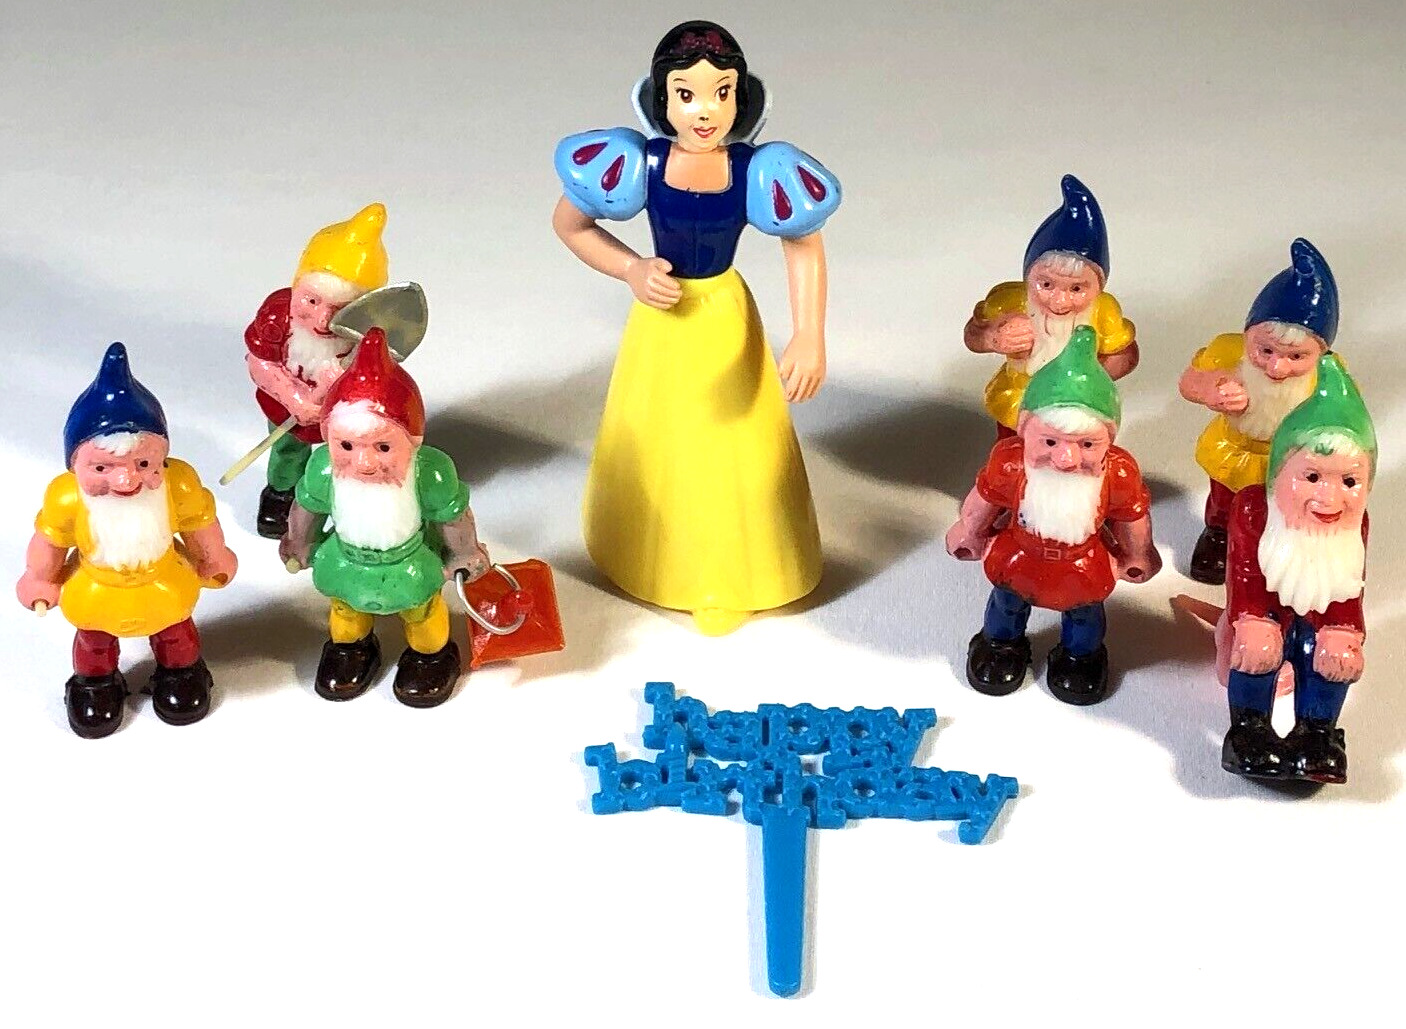 Vintage Snow White and the Seven Dwarfs Hard Plastic Cake Toppers Decoration